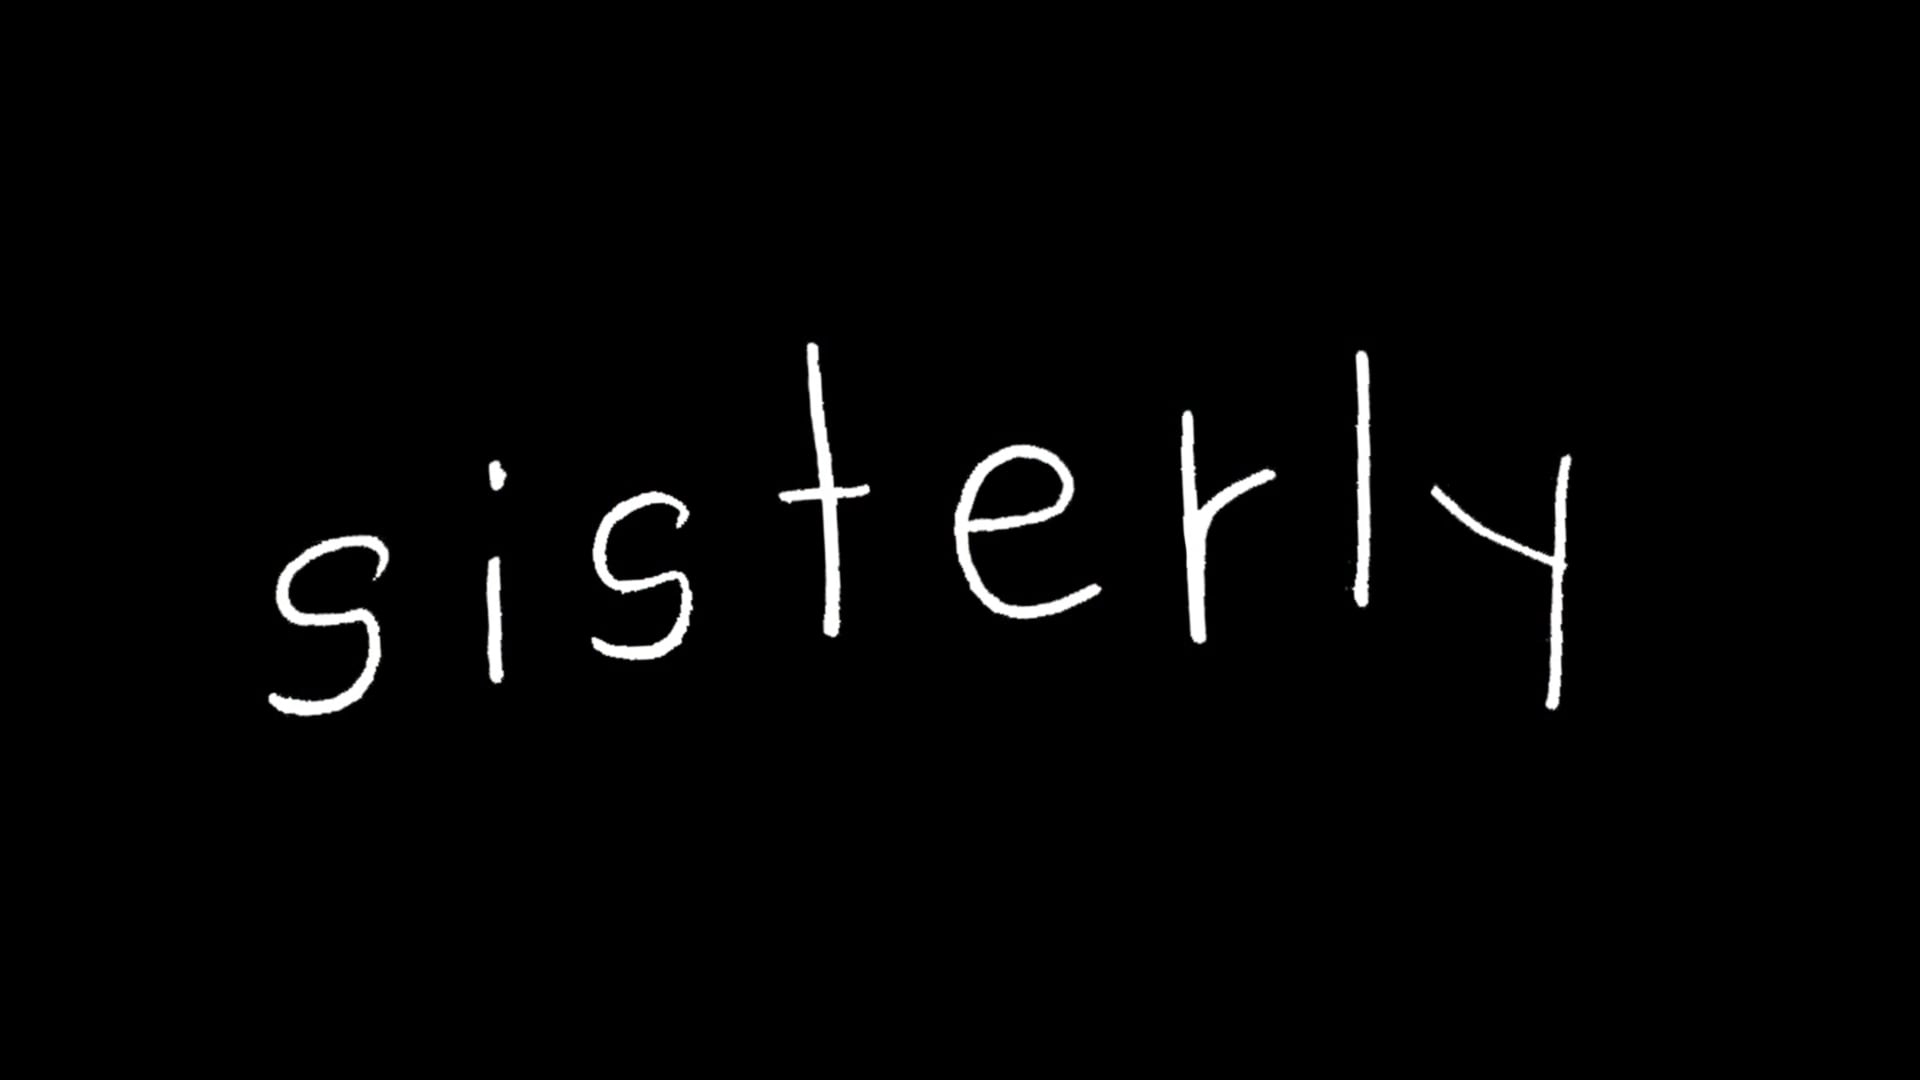 Sisterly - a documentary about autism and sisterhood.